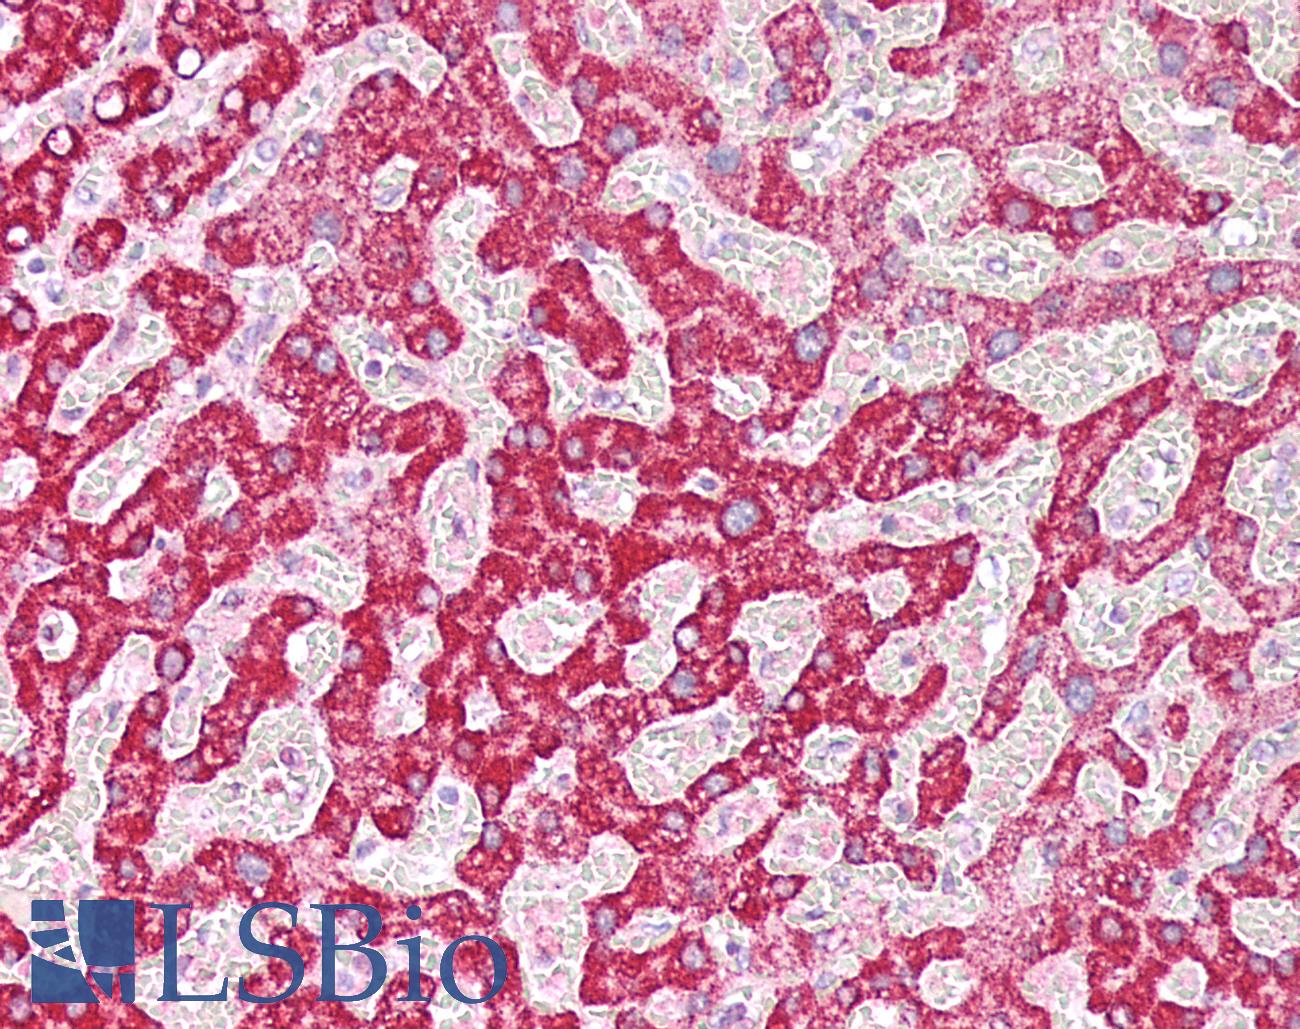 PARG Antibody - Human Liver: Formalin-Fixed, Paraffin-Embedded (FFPE)